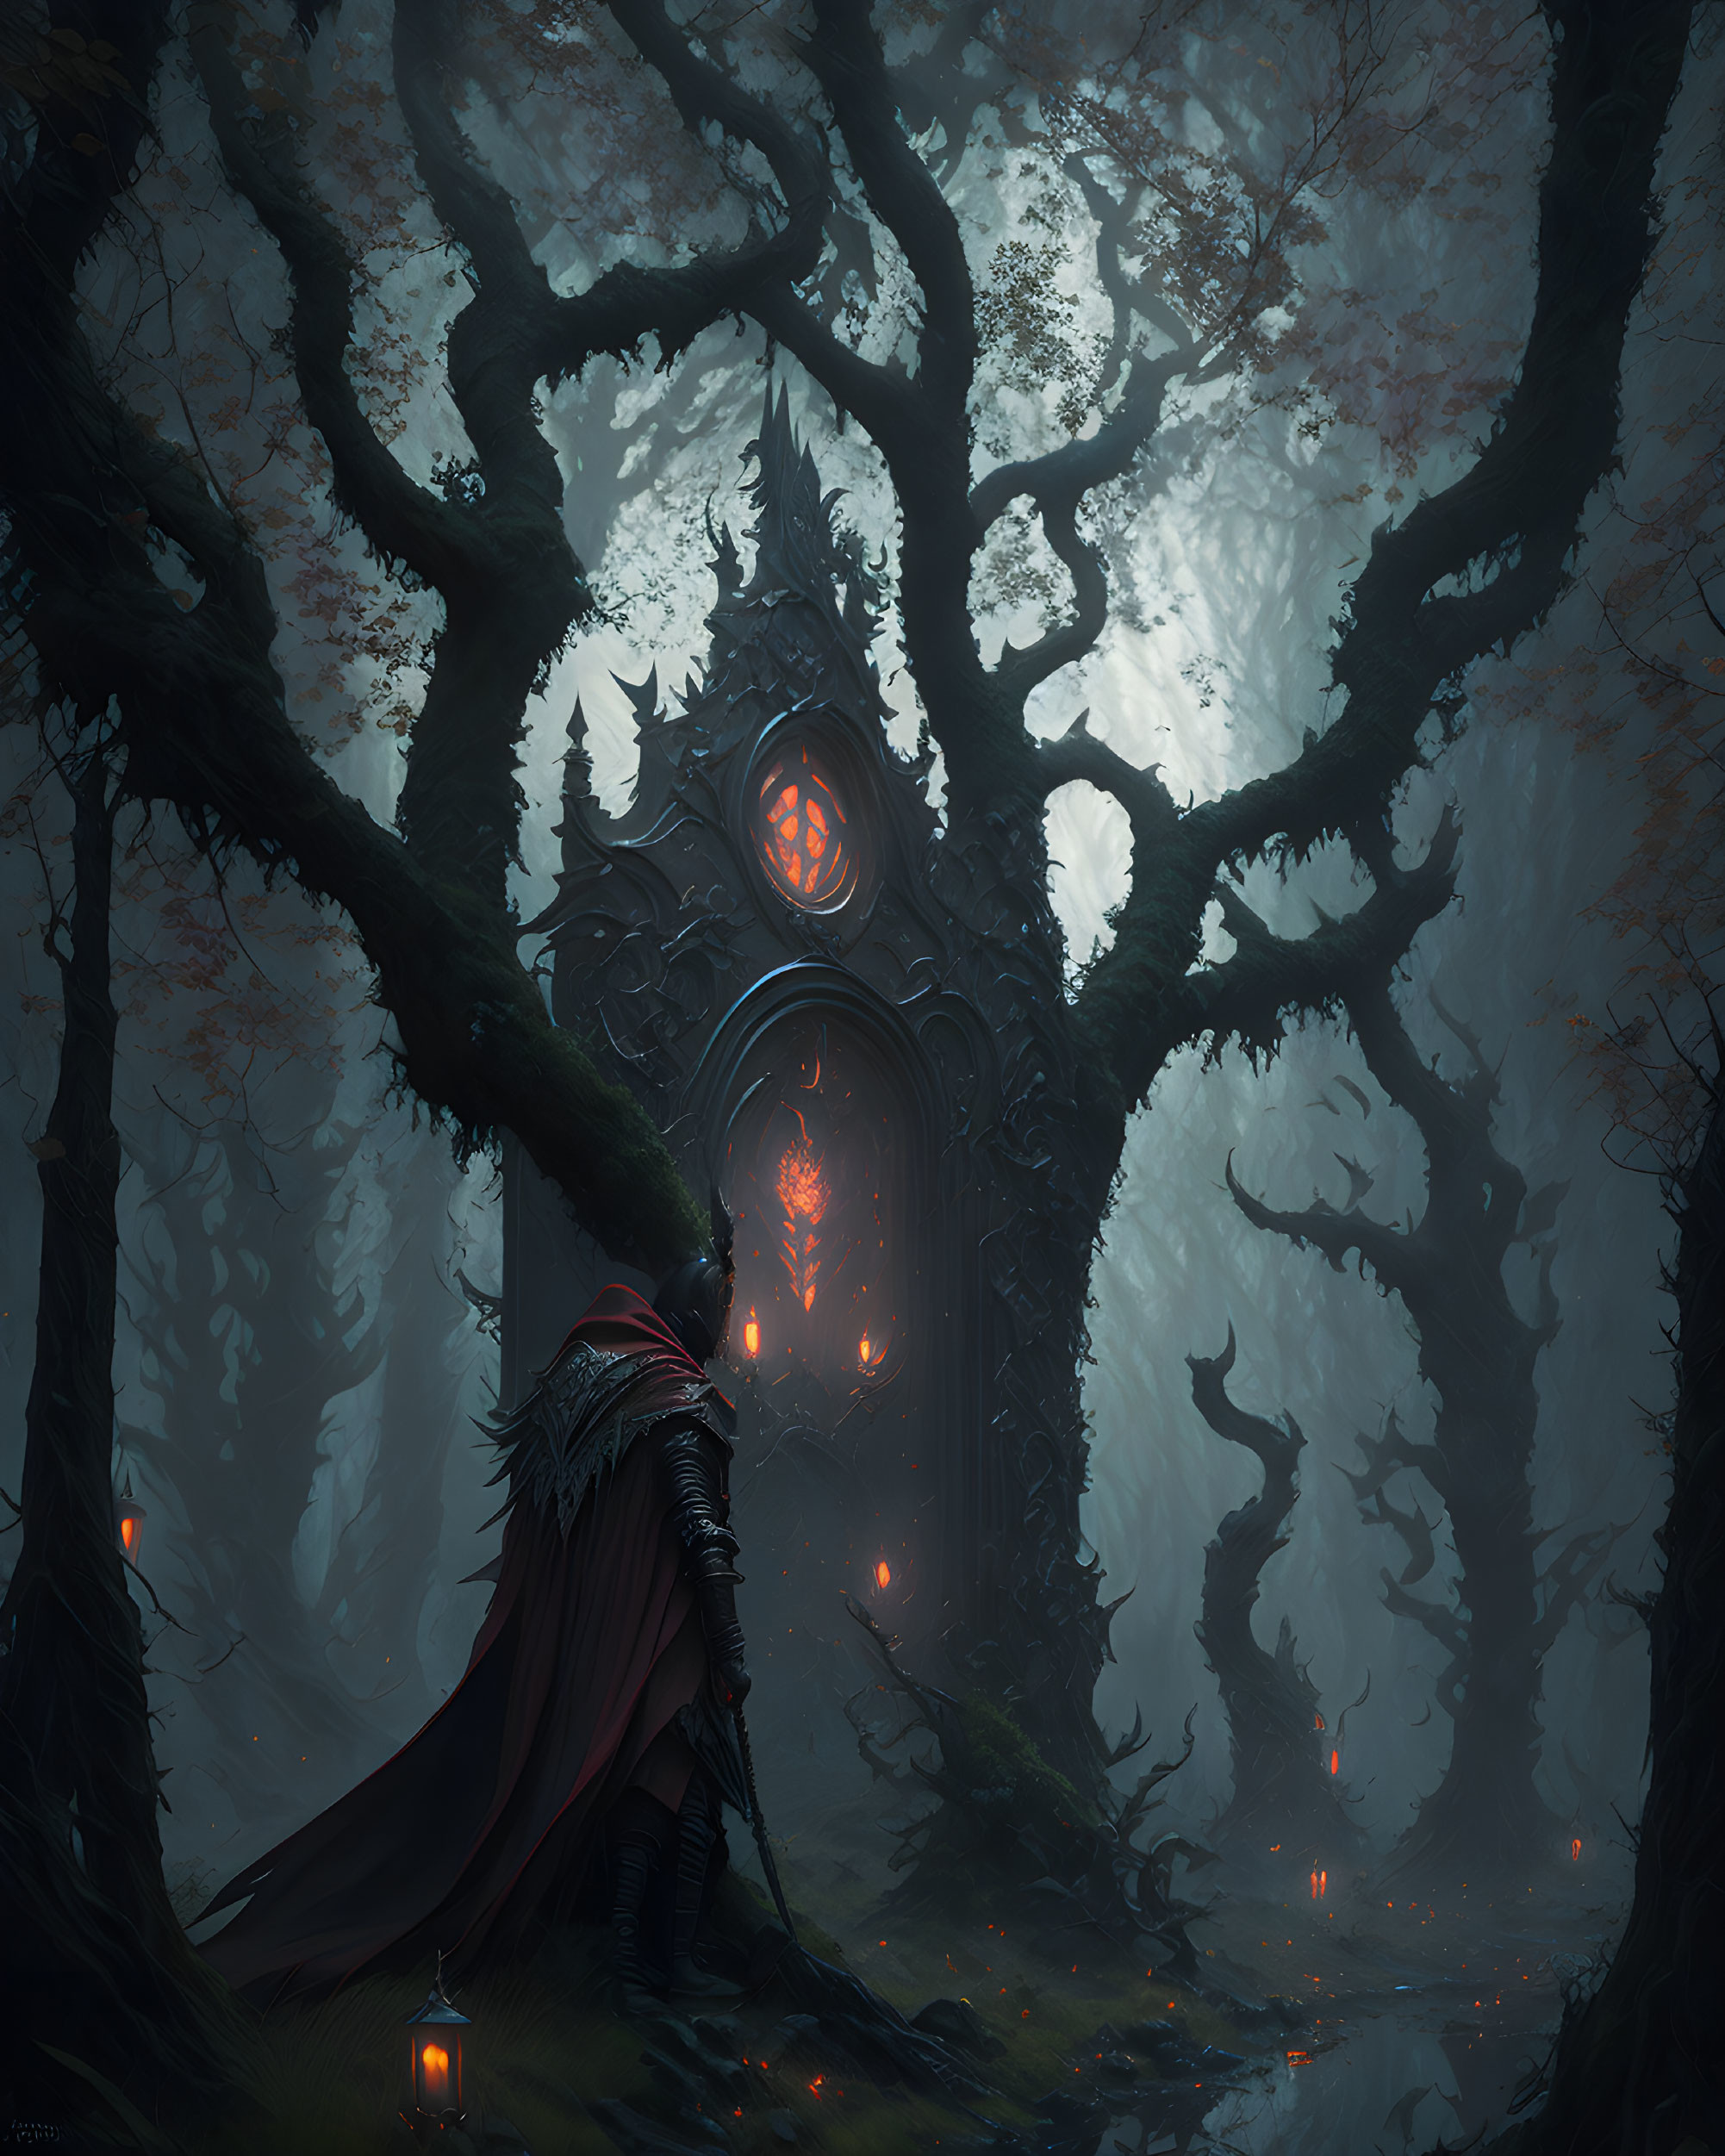 Cloaked figure near glowing door in mystical forest